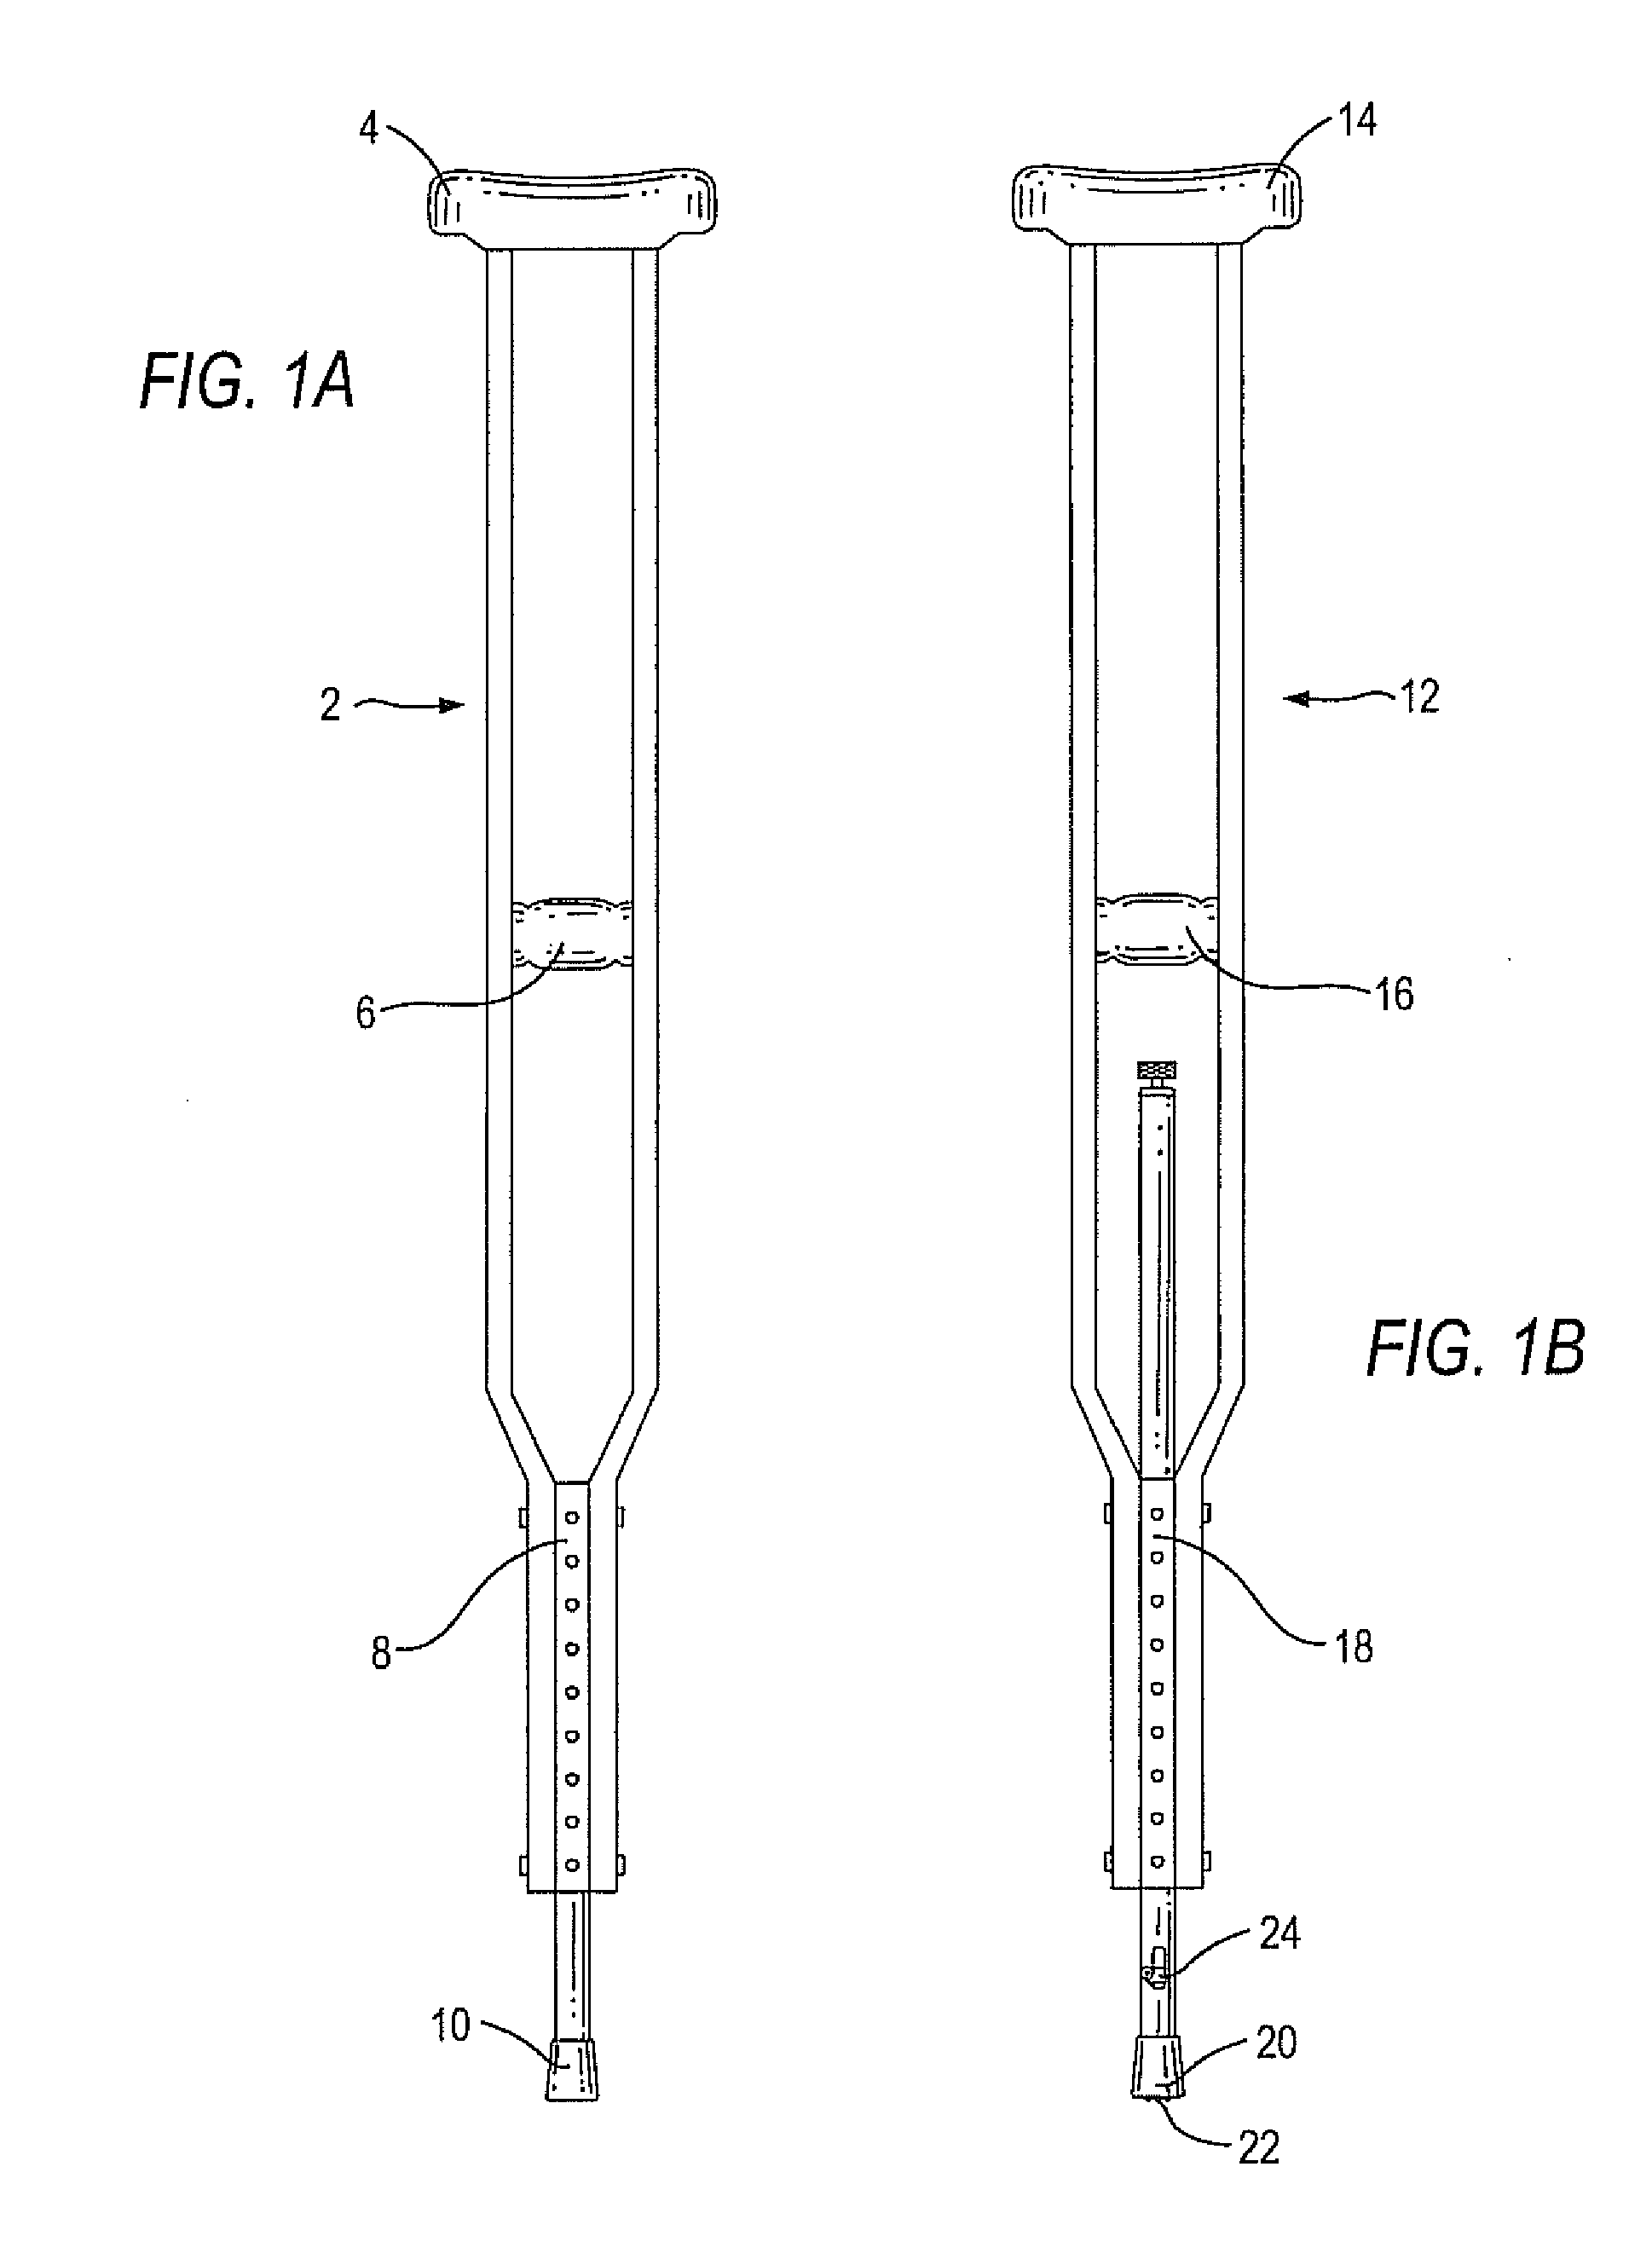 Retractable gripping apparatus for walking assistance devices